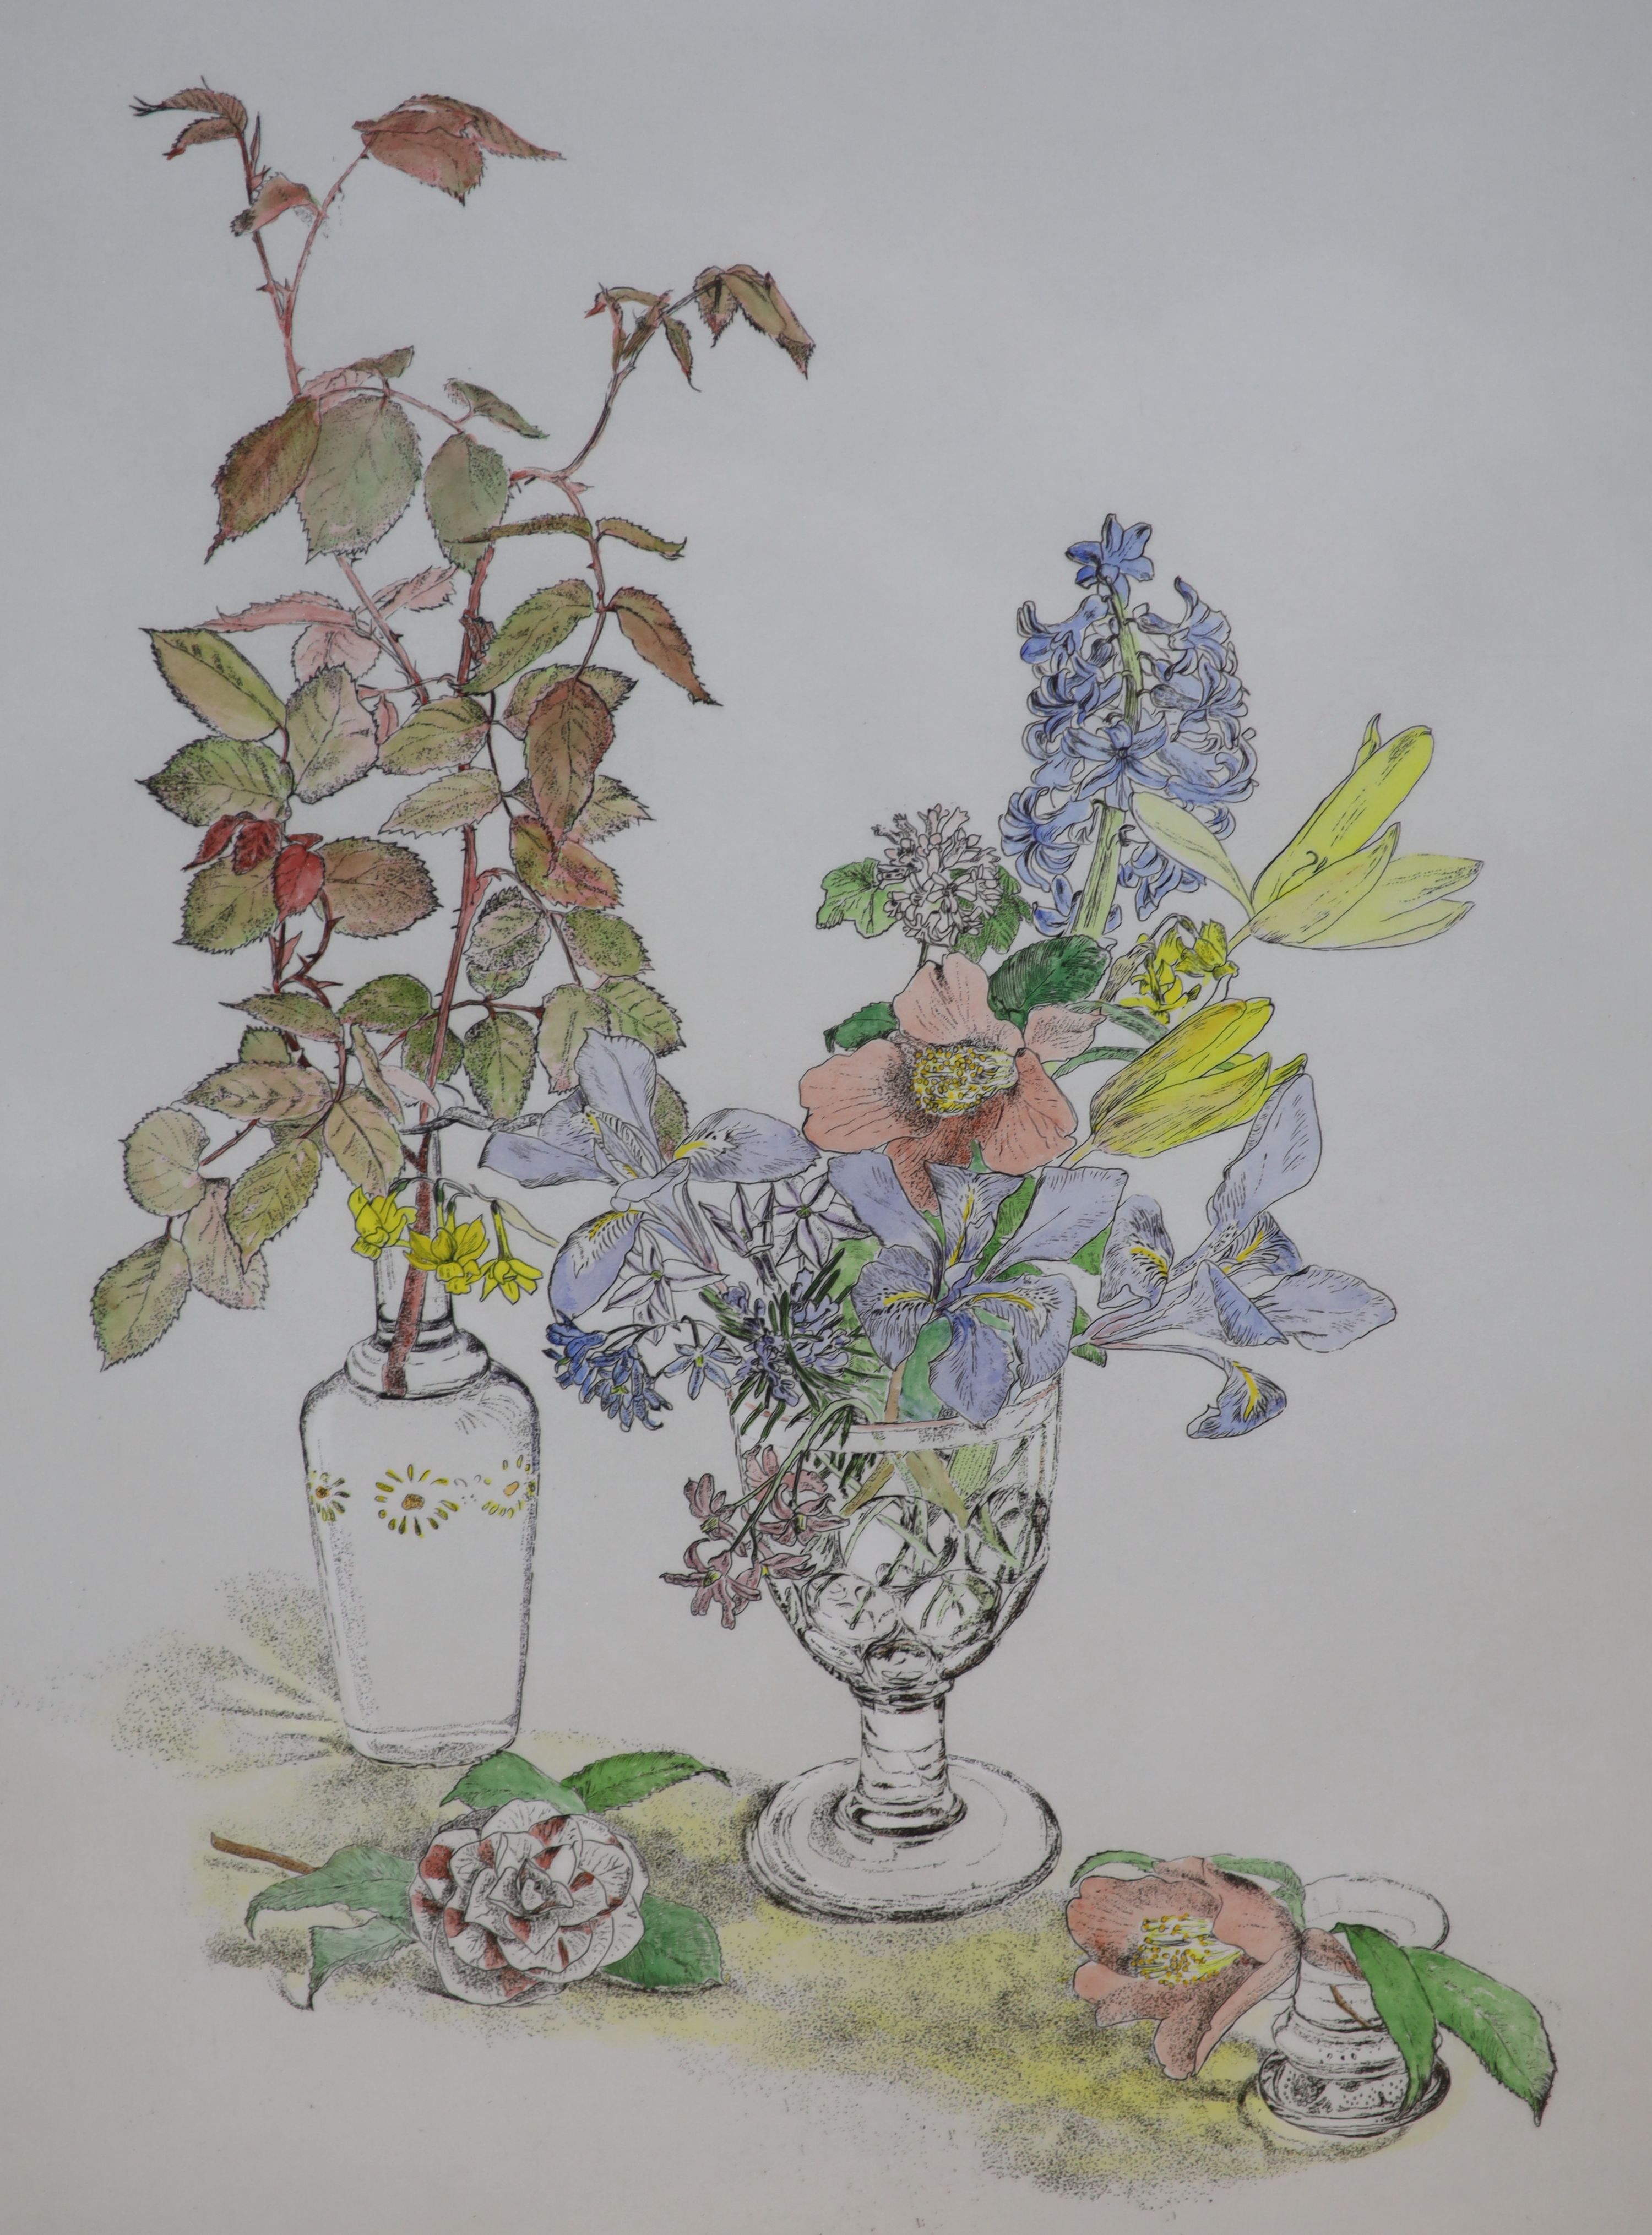 Gillian Whaite (1934-2012), etching and watercolour, 'Flowers', signed, 30/60, 59 x 44cm